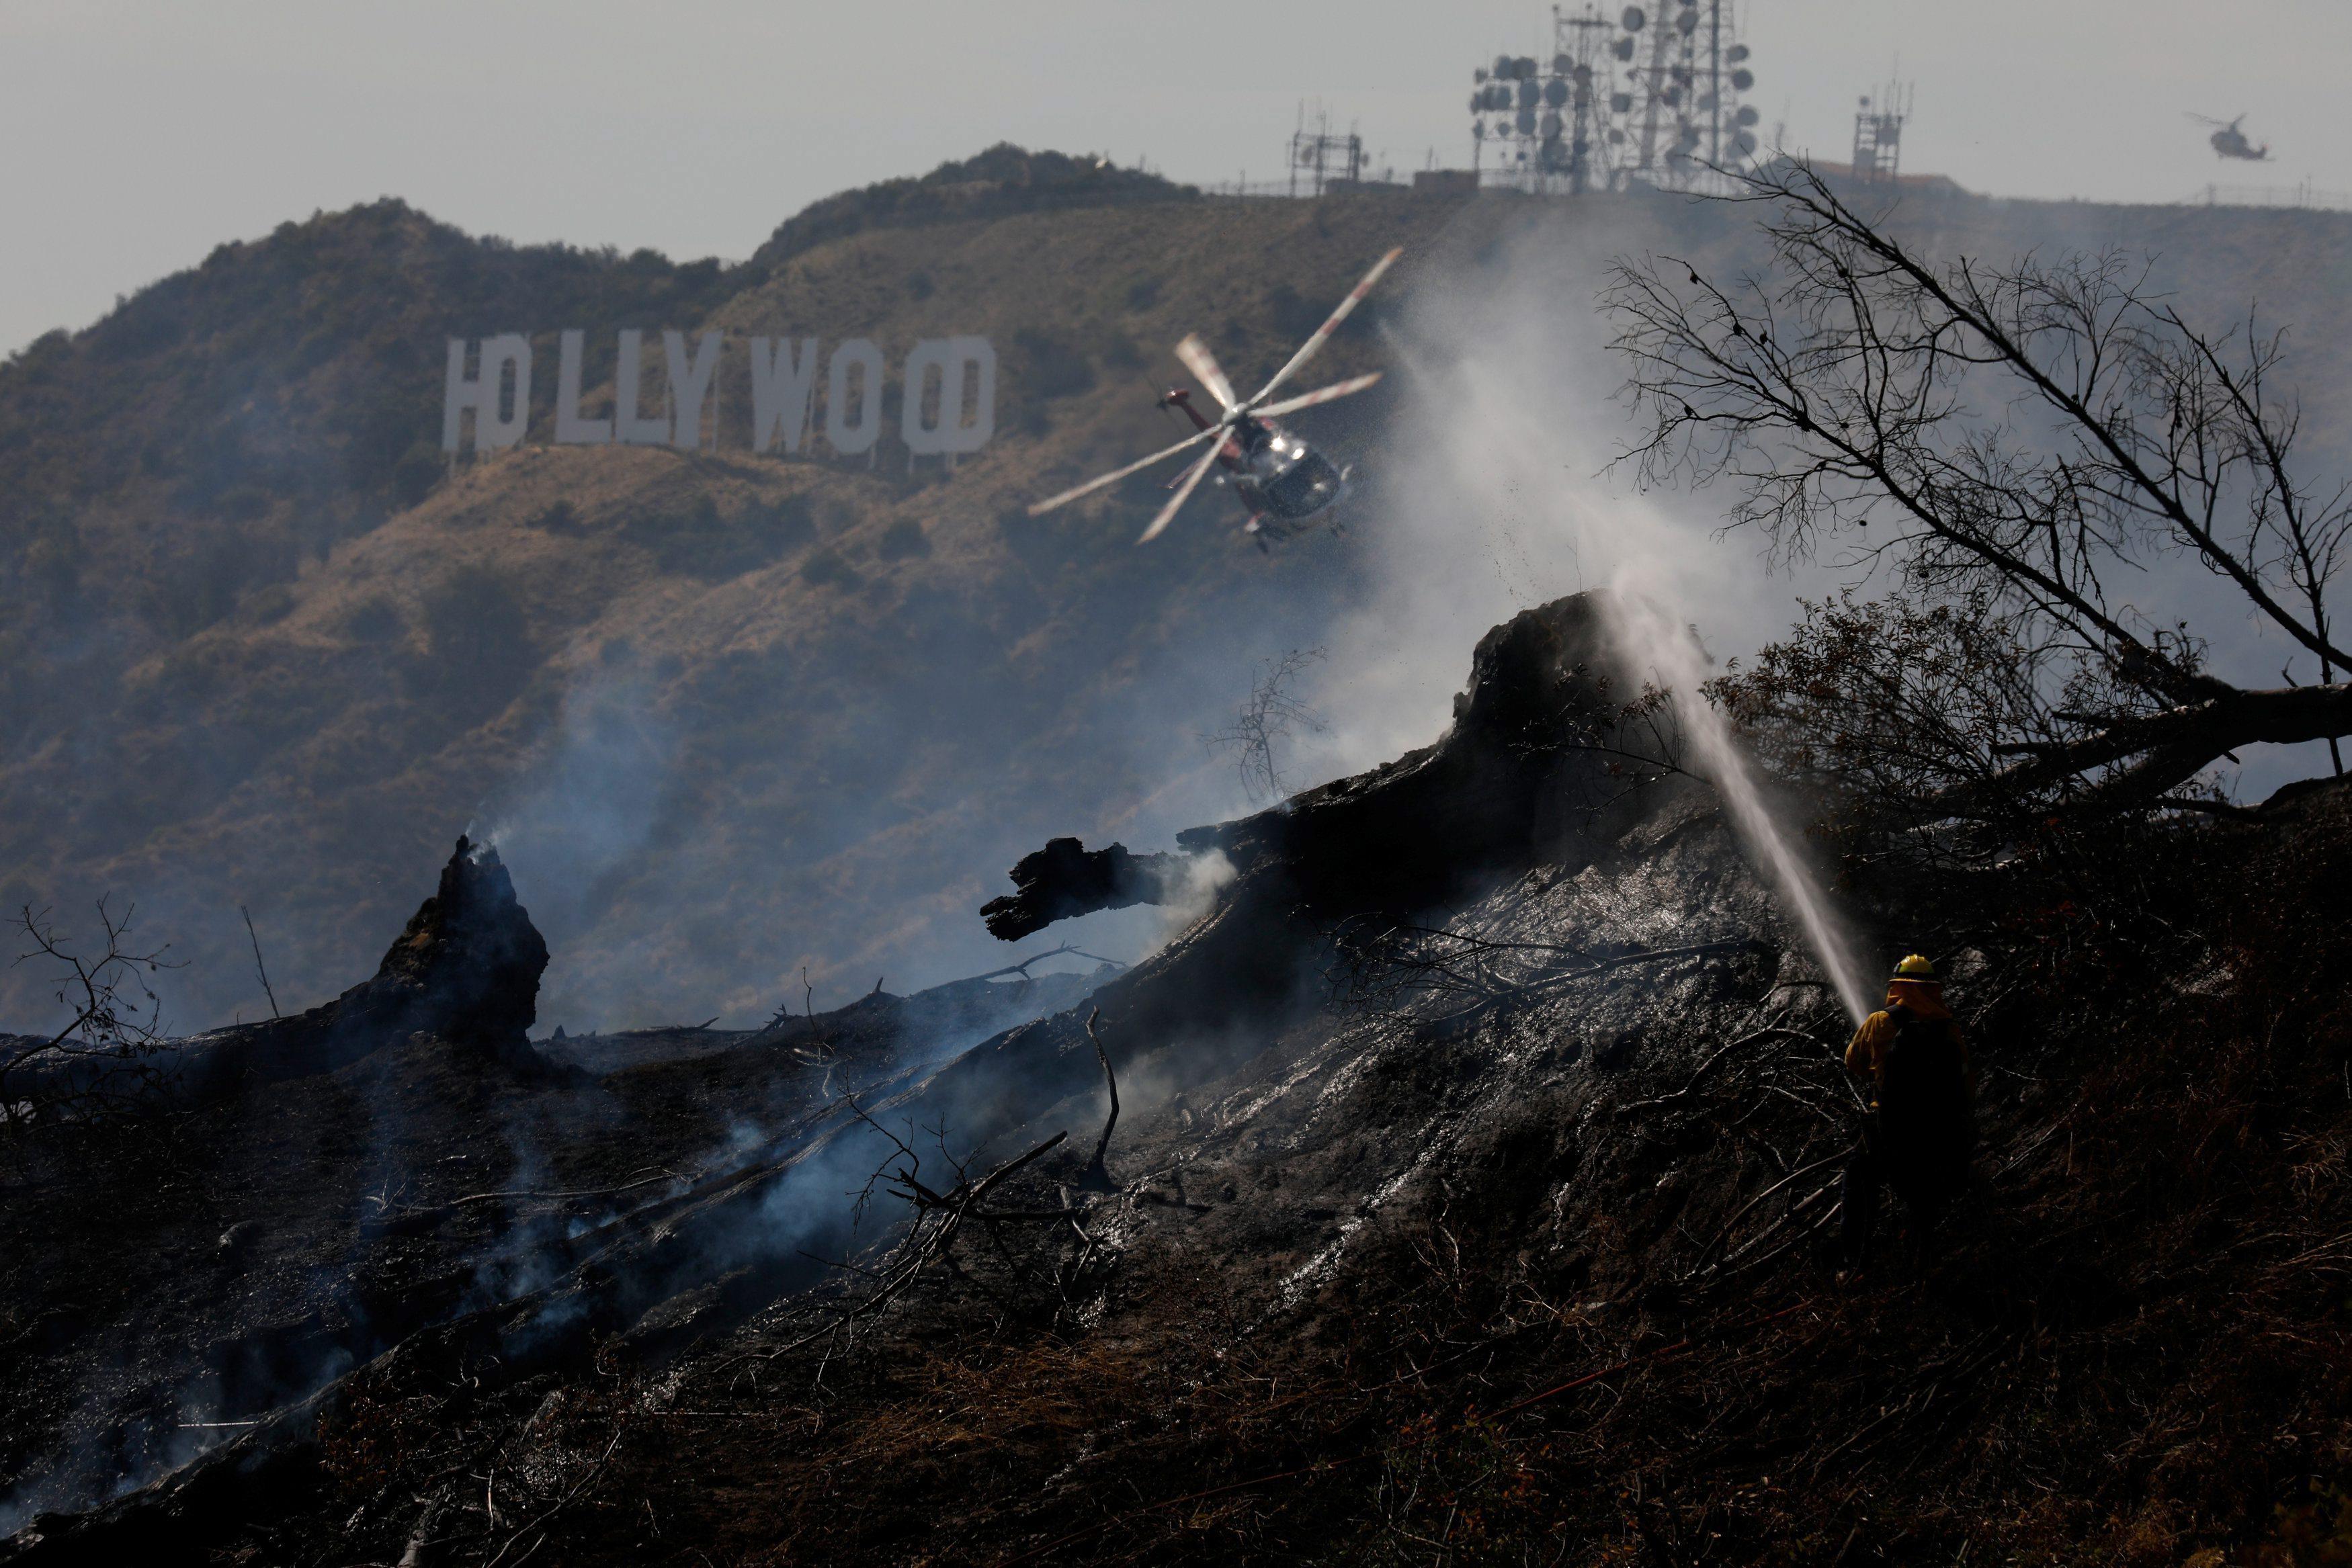 Firefighters work on a fire near the landmark Griffith Observatory in the hills overlooking the Holl